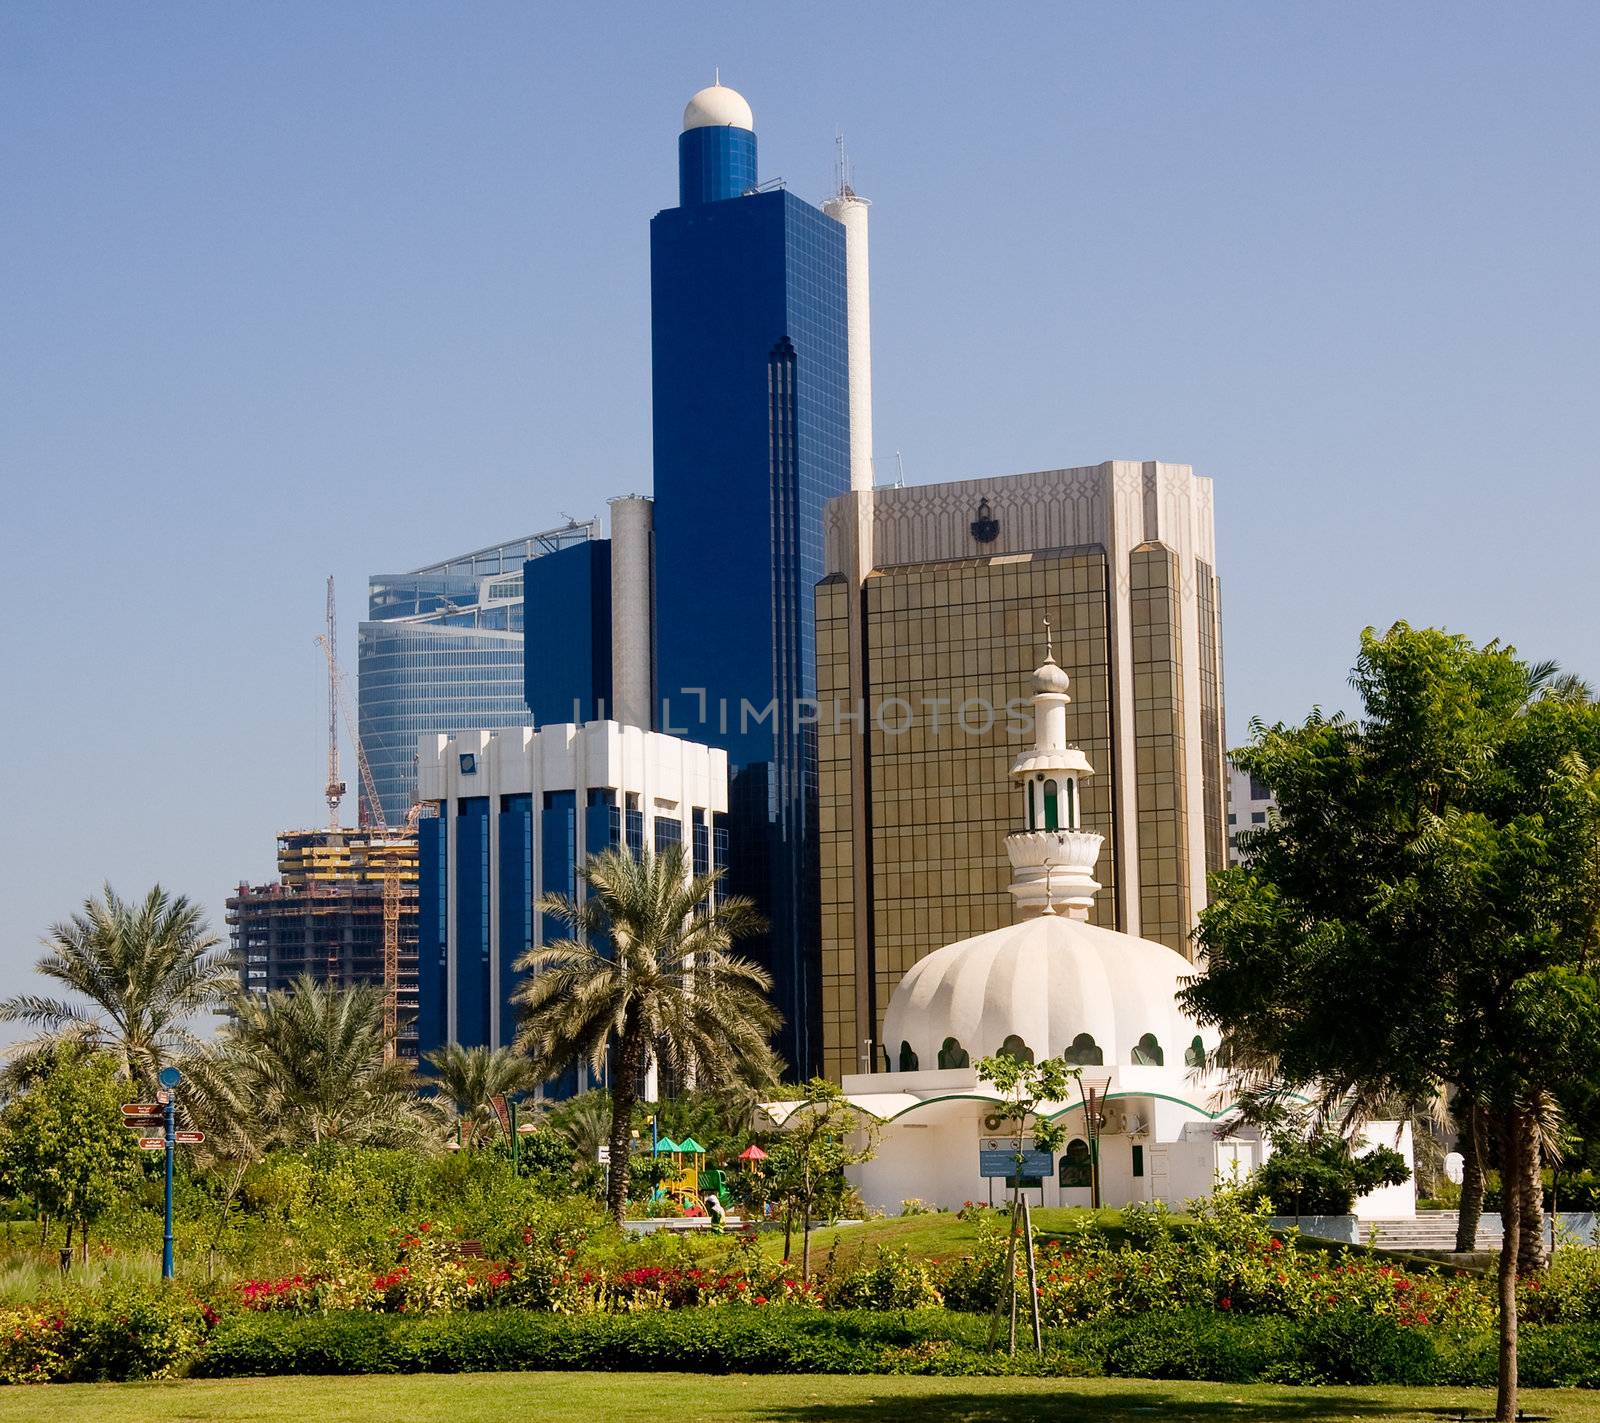 Group of office skyscrapers in Abu Dhabi with a small mosque in the foreground